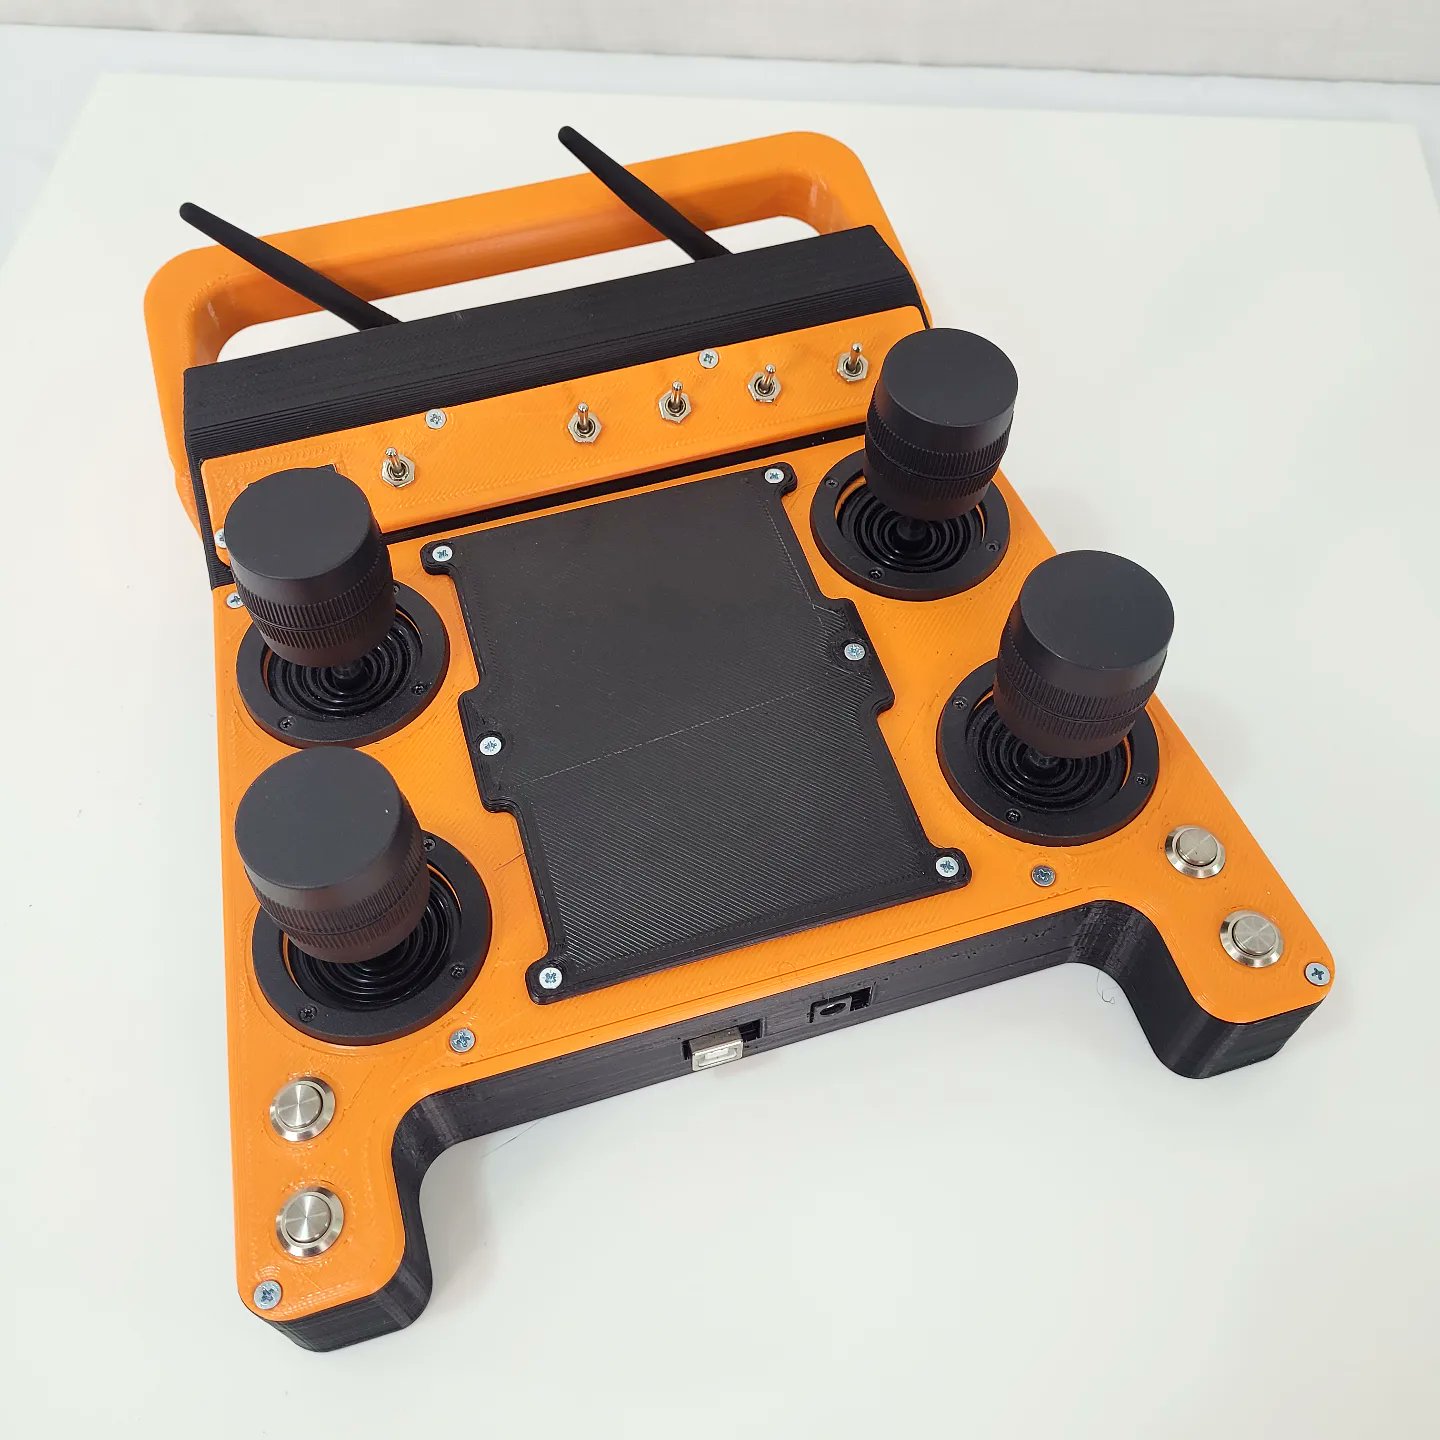 An awesome new open source long-range RC transmitter